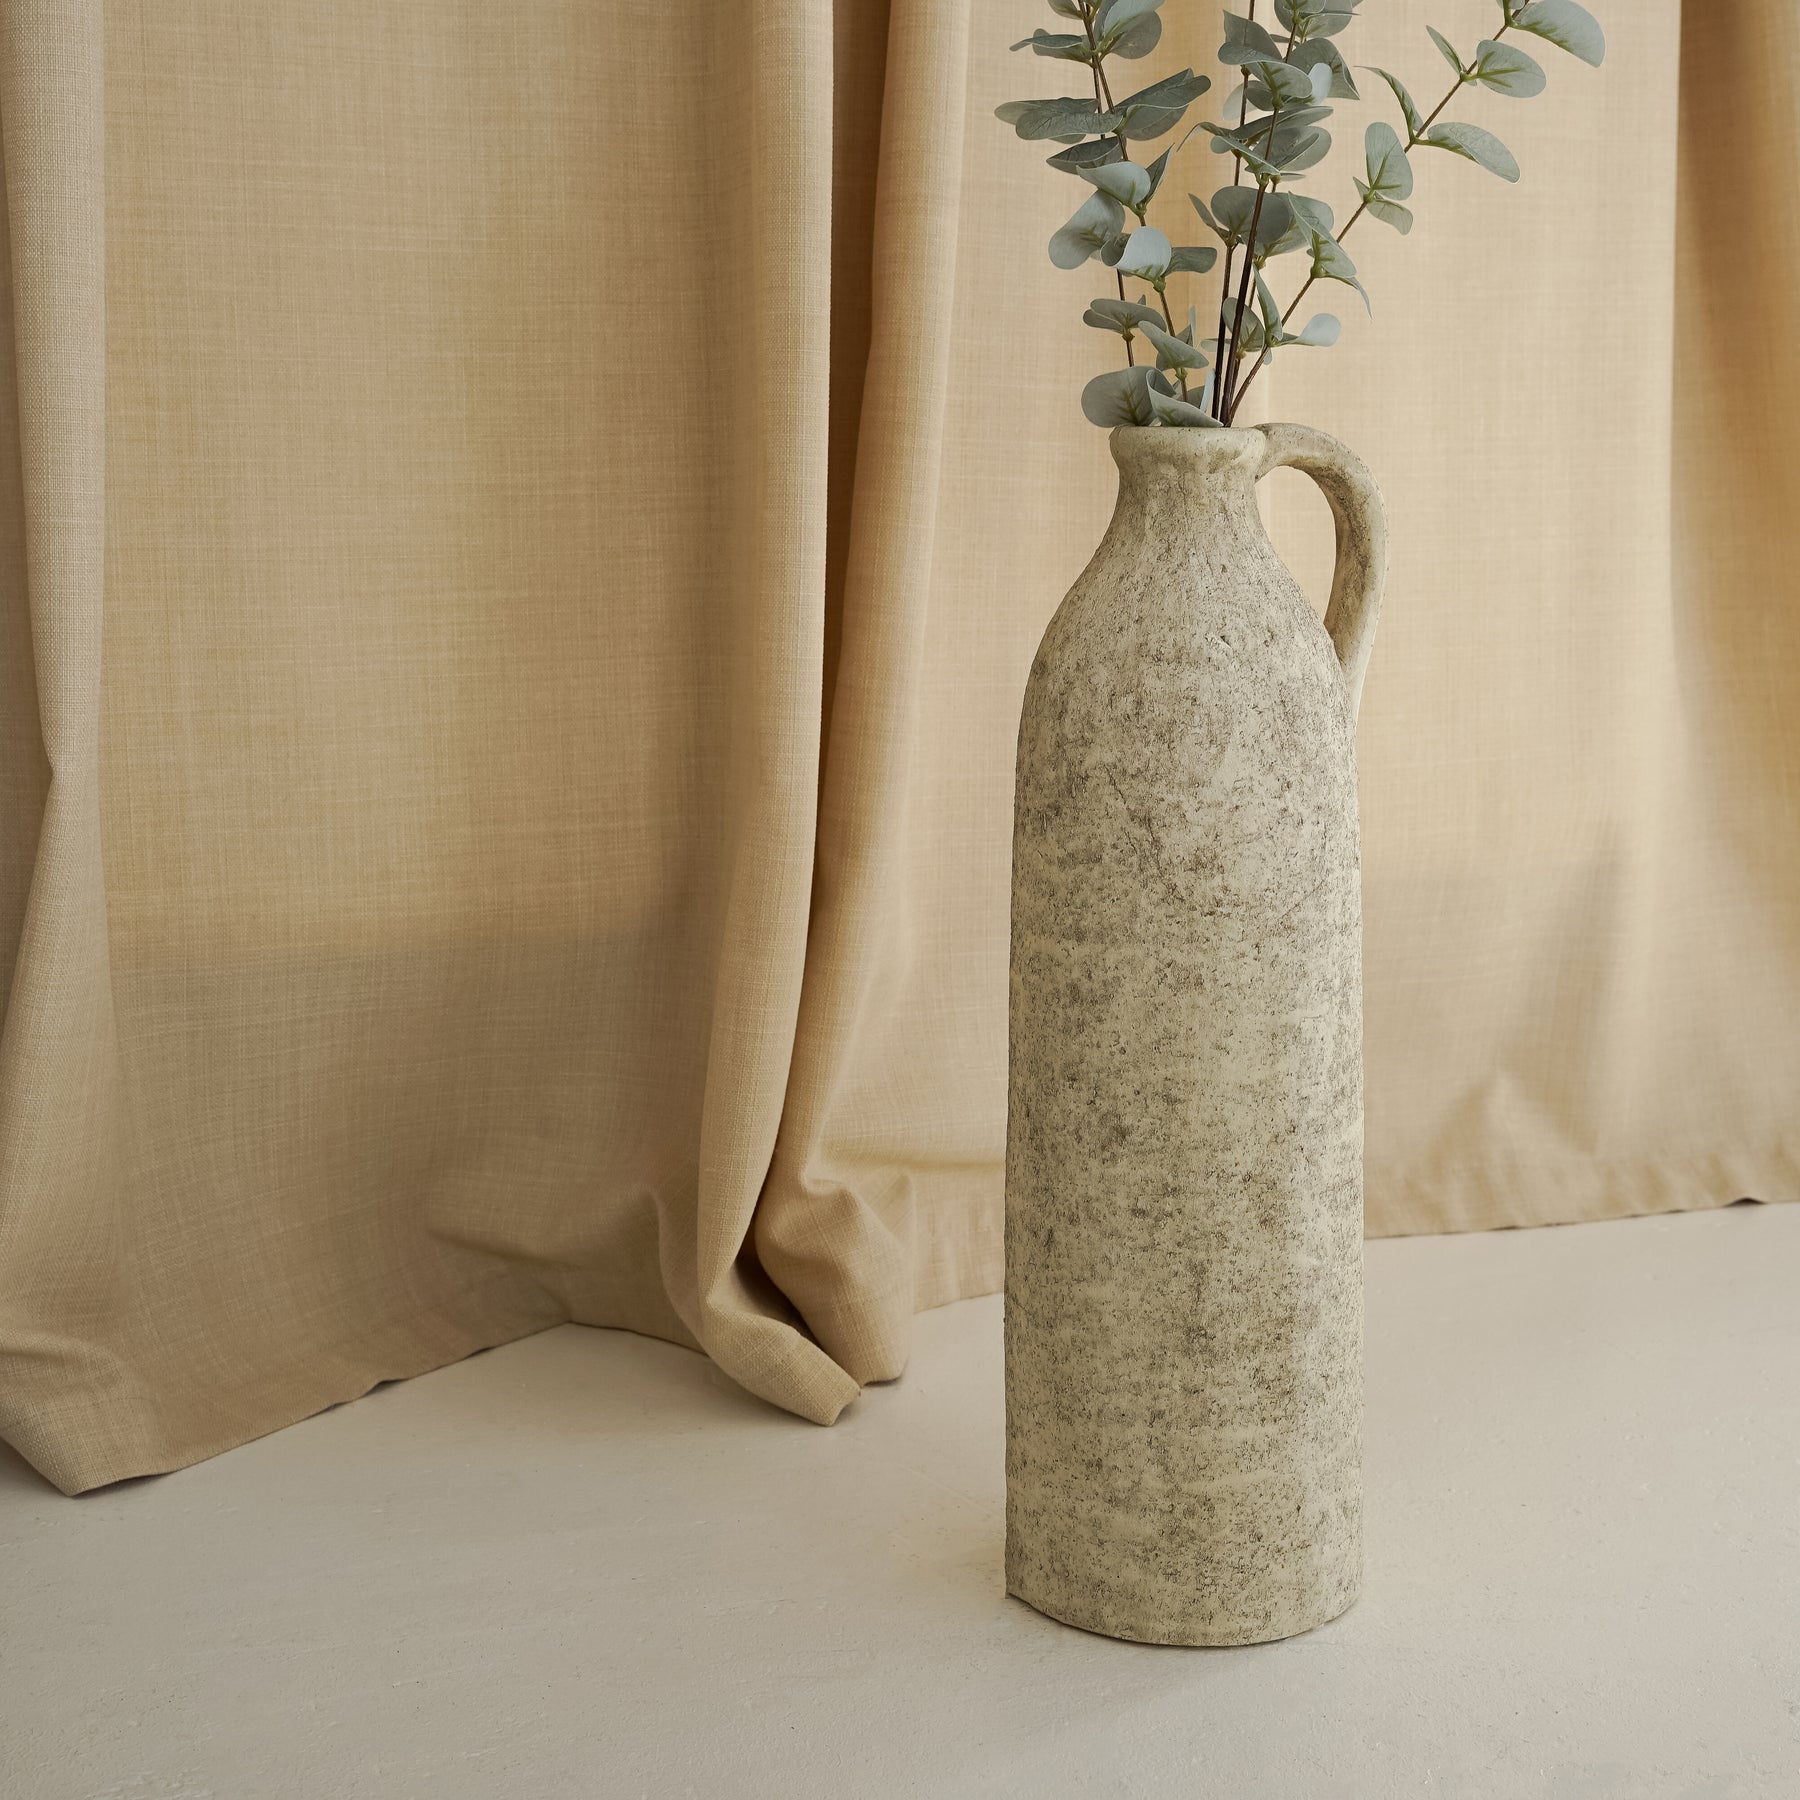 Beige Textured Terracotta Large Vase with plants